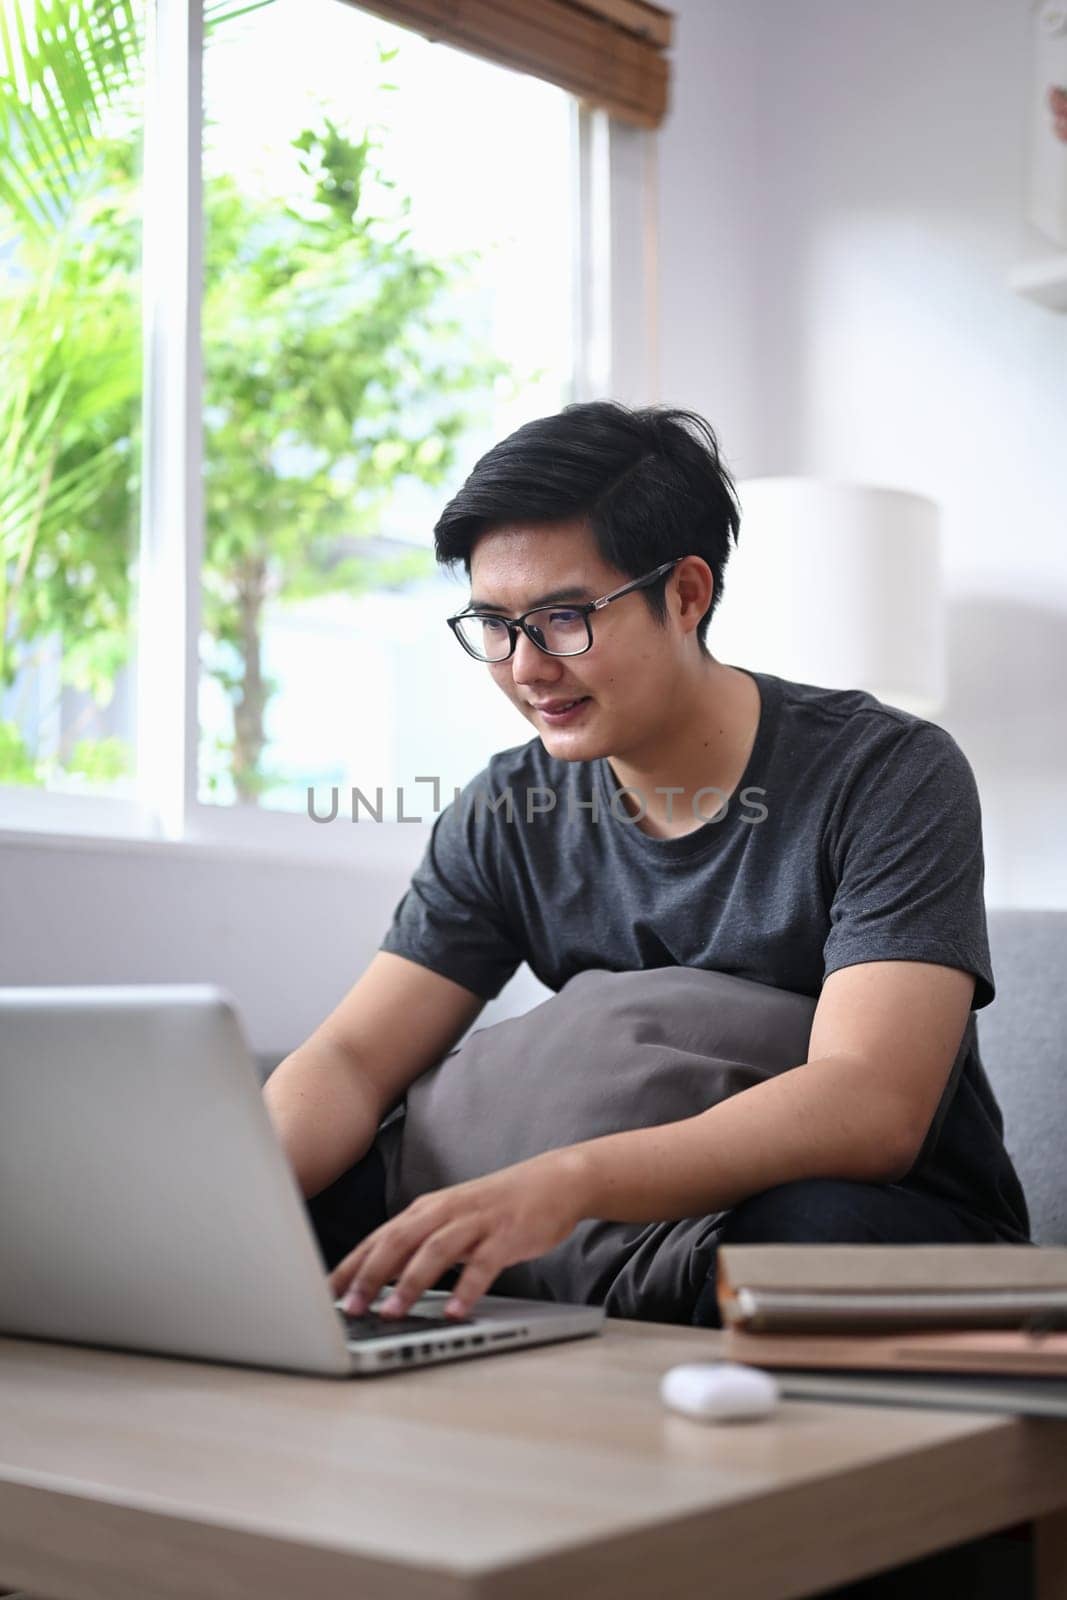 Smiling young man surfing internet with computer laptop in living room.